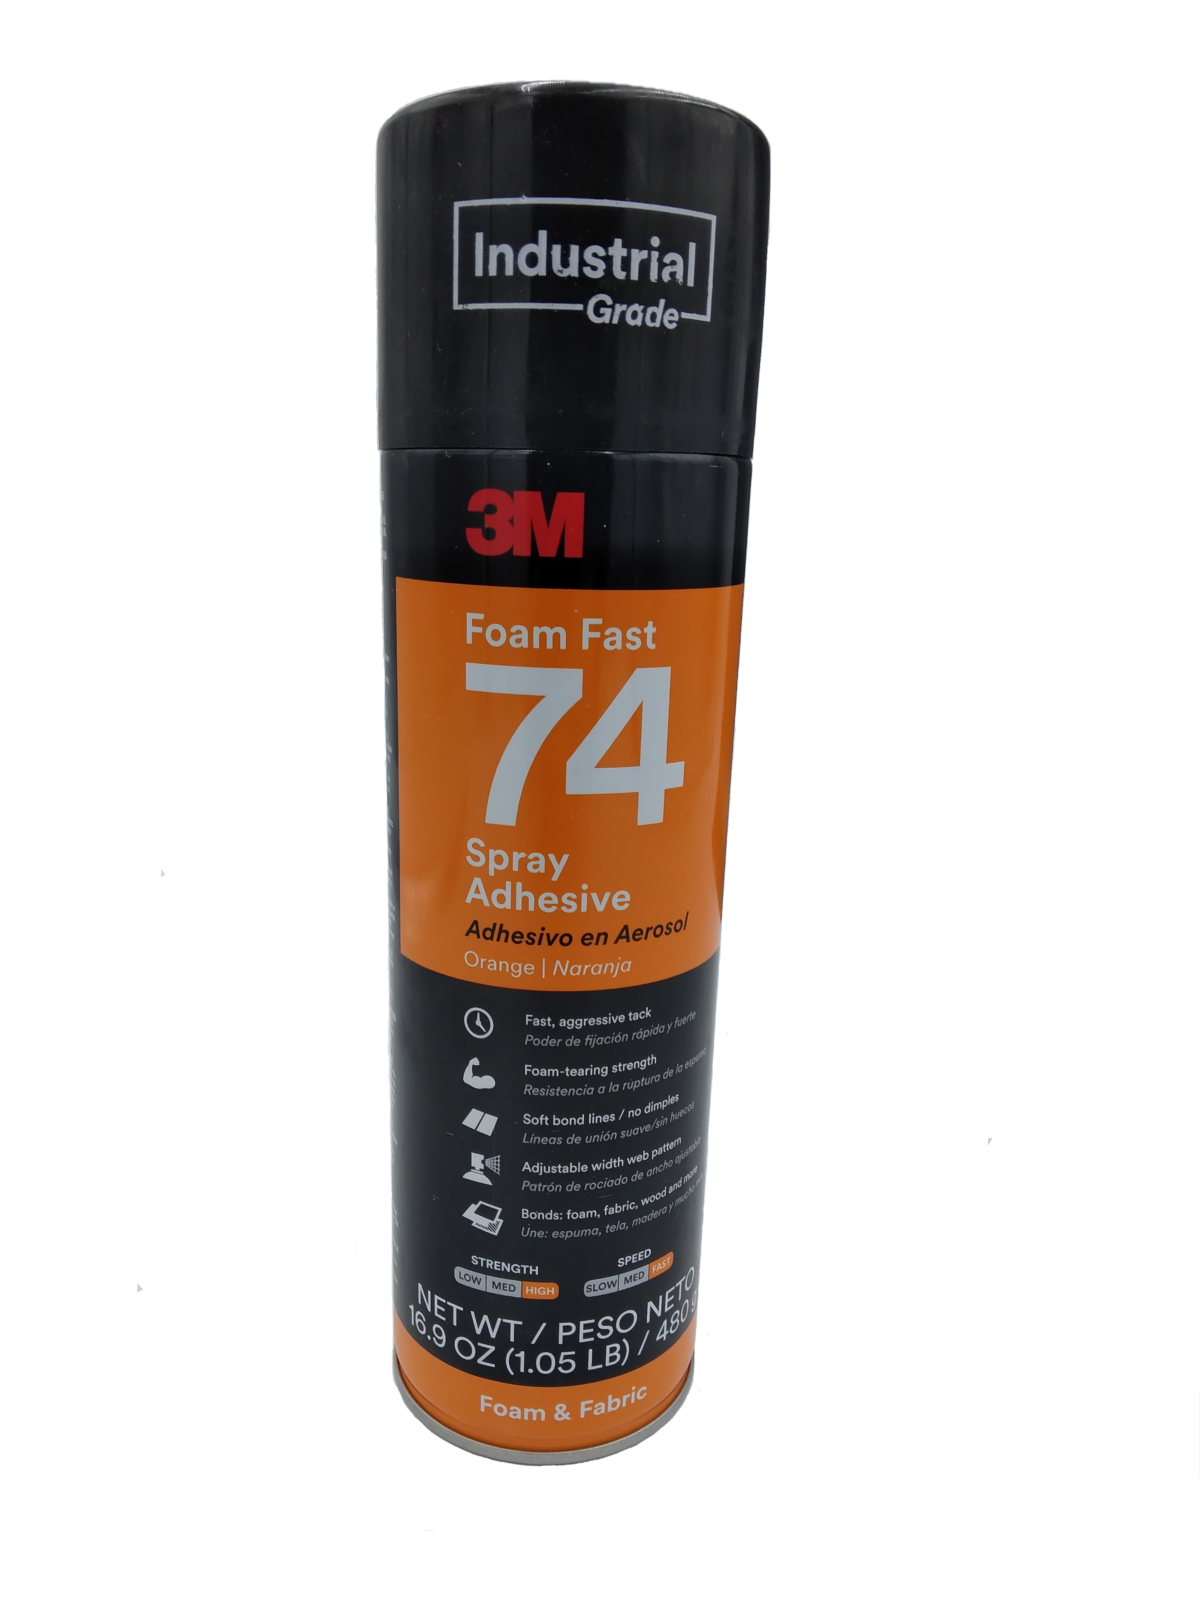 3M Foam Fast 74 Spray Adhesive - 16.9oz cans sold individually